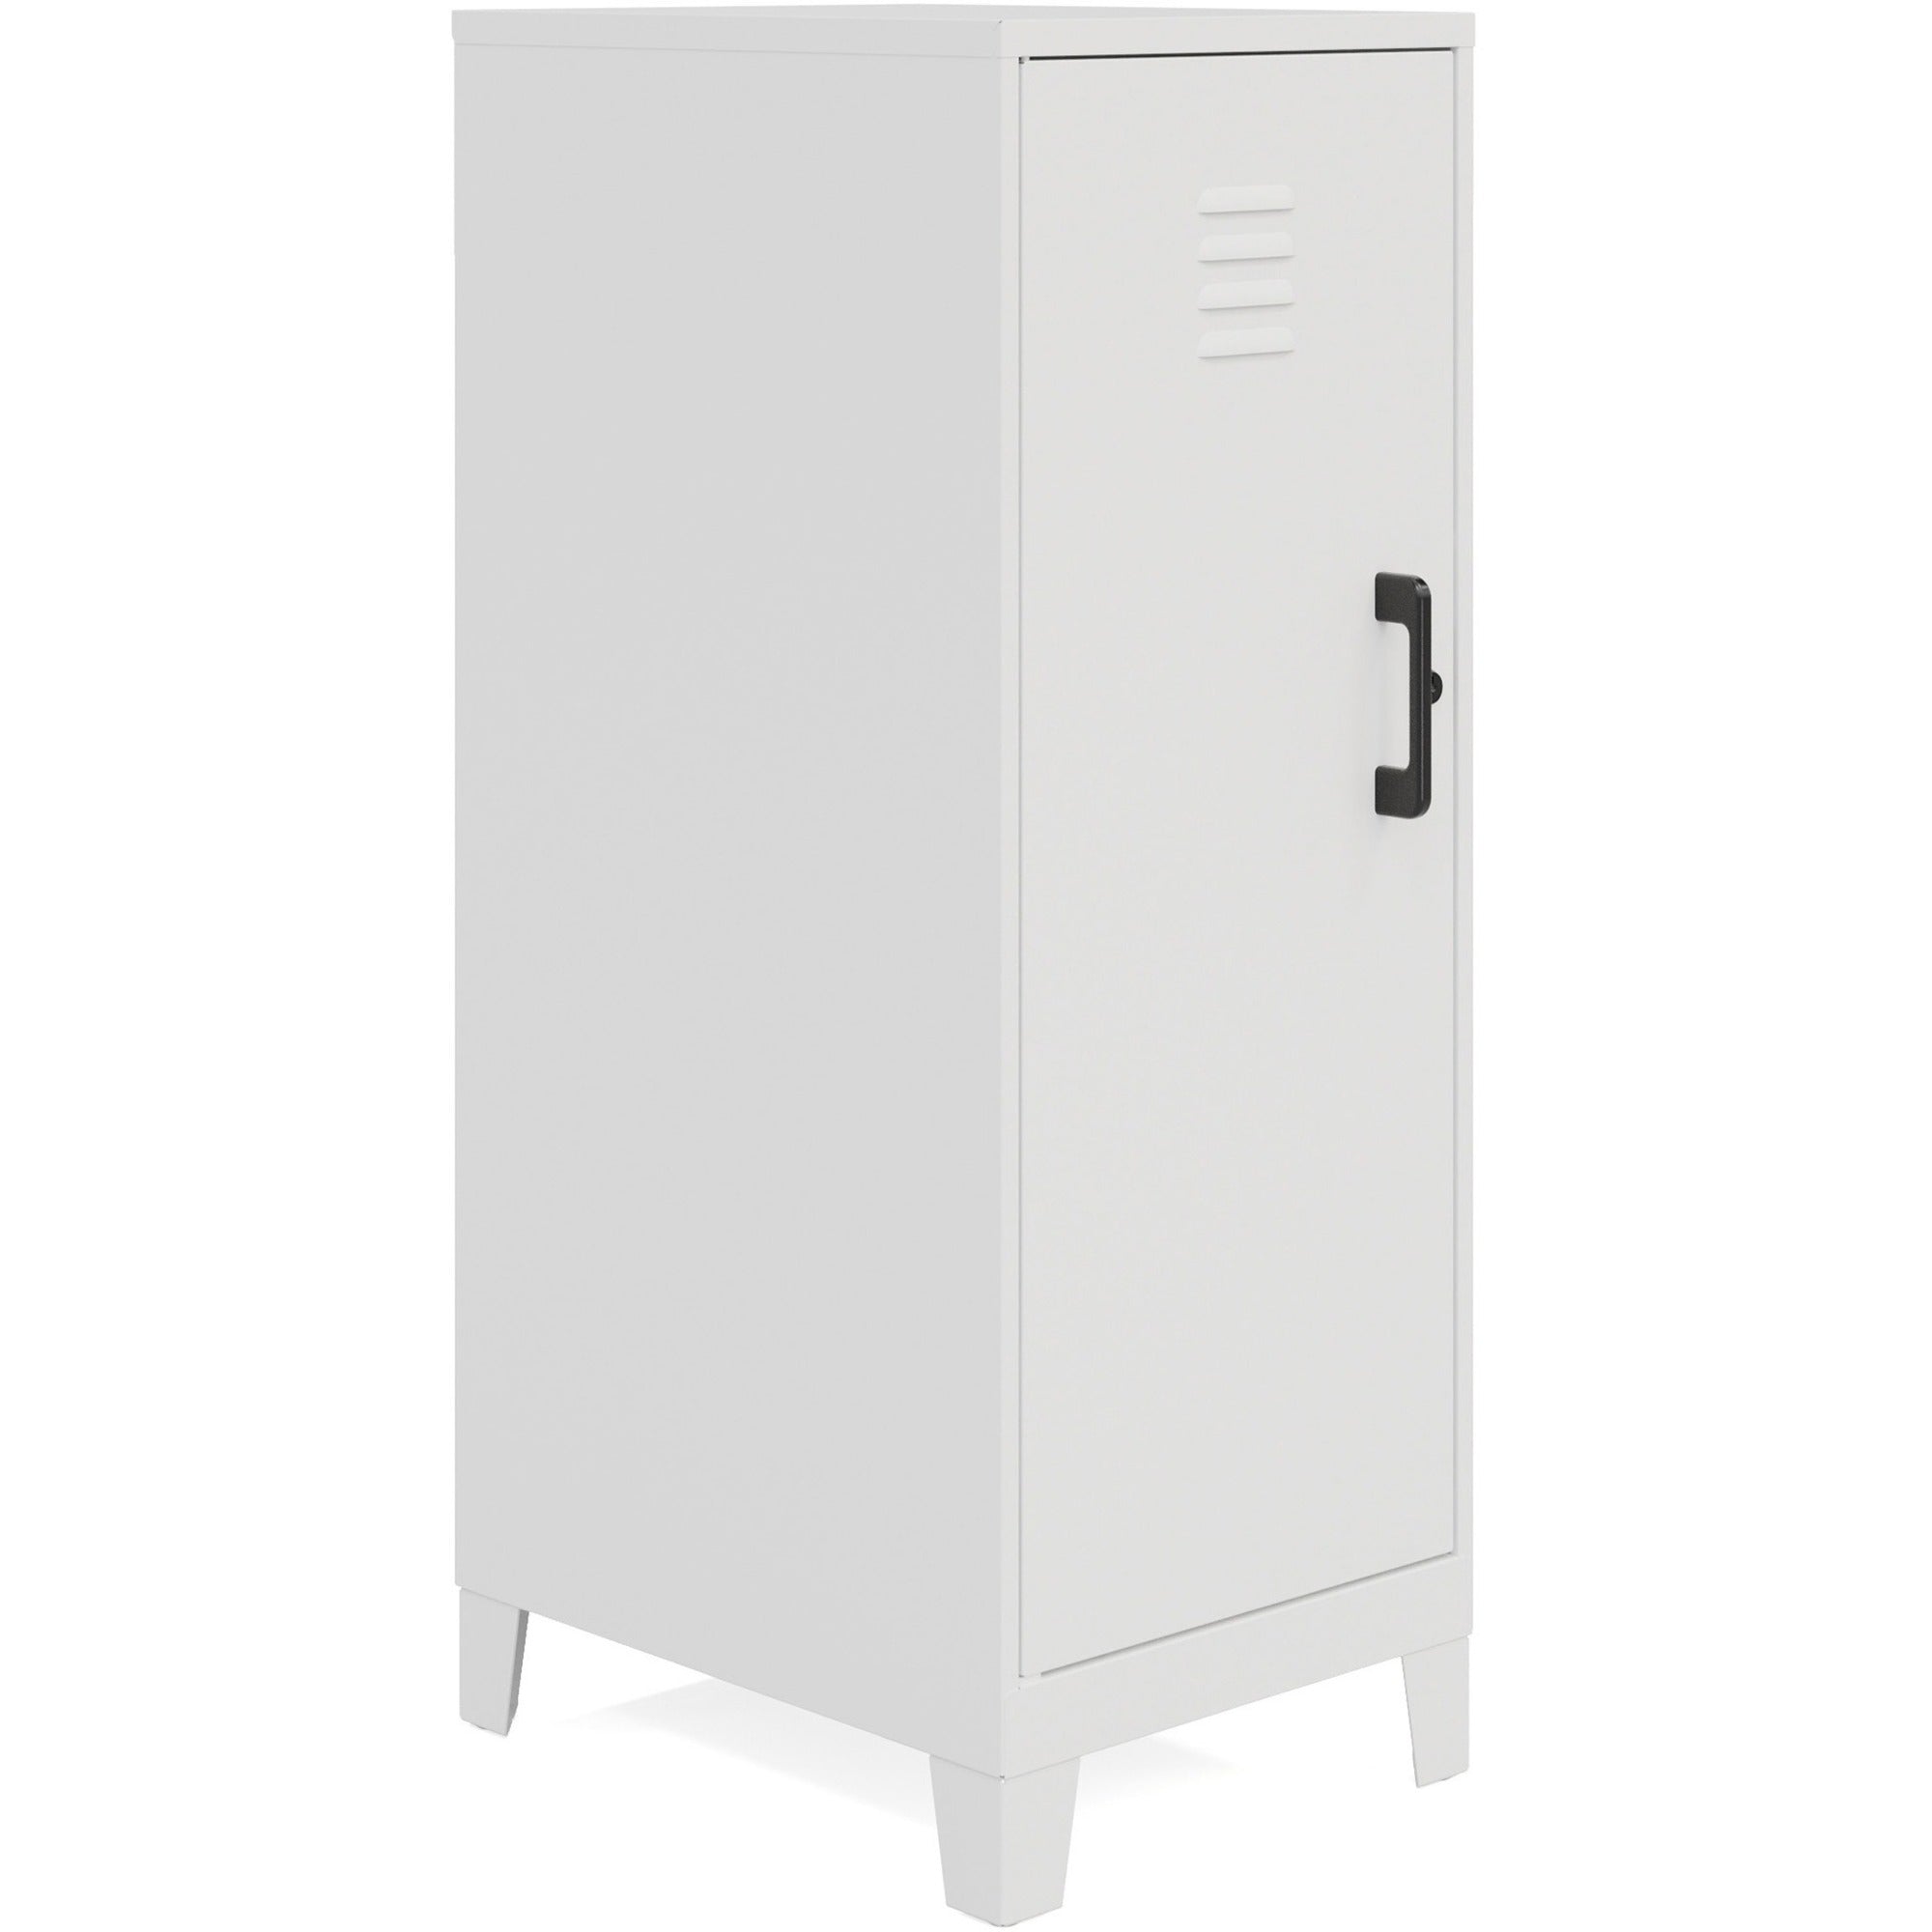 nusparc-personal-locker-3-shelves-for-office-home-sport-equipments-toy-game-classroom-playroom-basement-garage-overall-size-425-x-142-x-18-white-steel-taa-compliant_nprsl318zzwe - 1